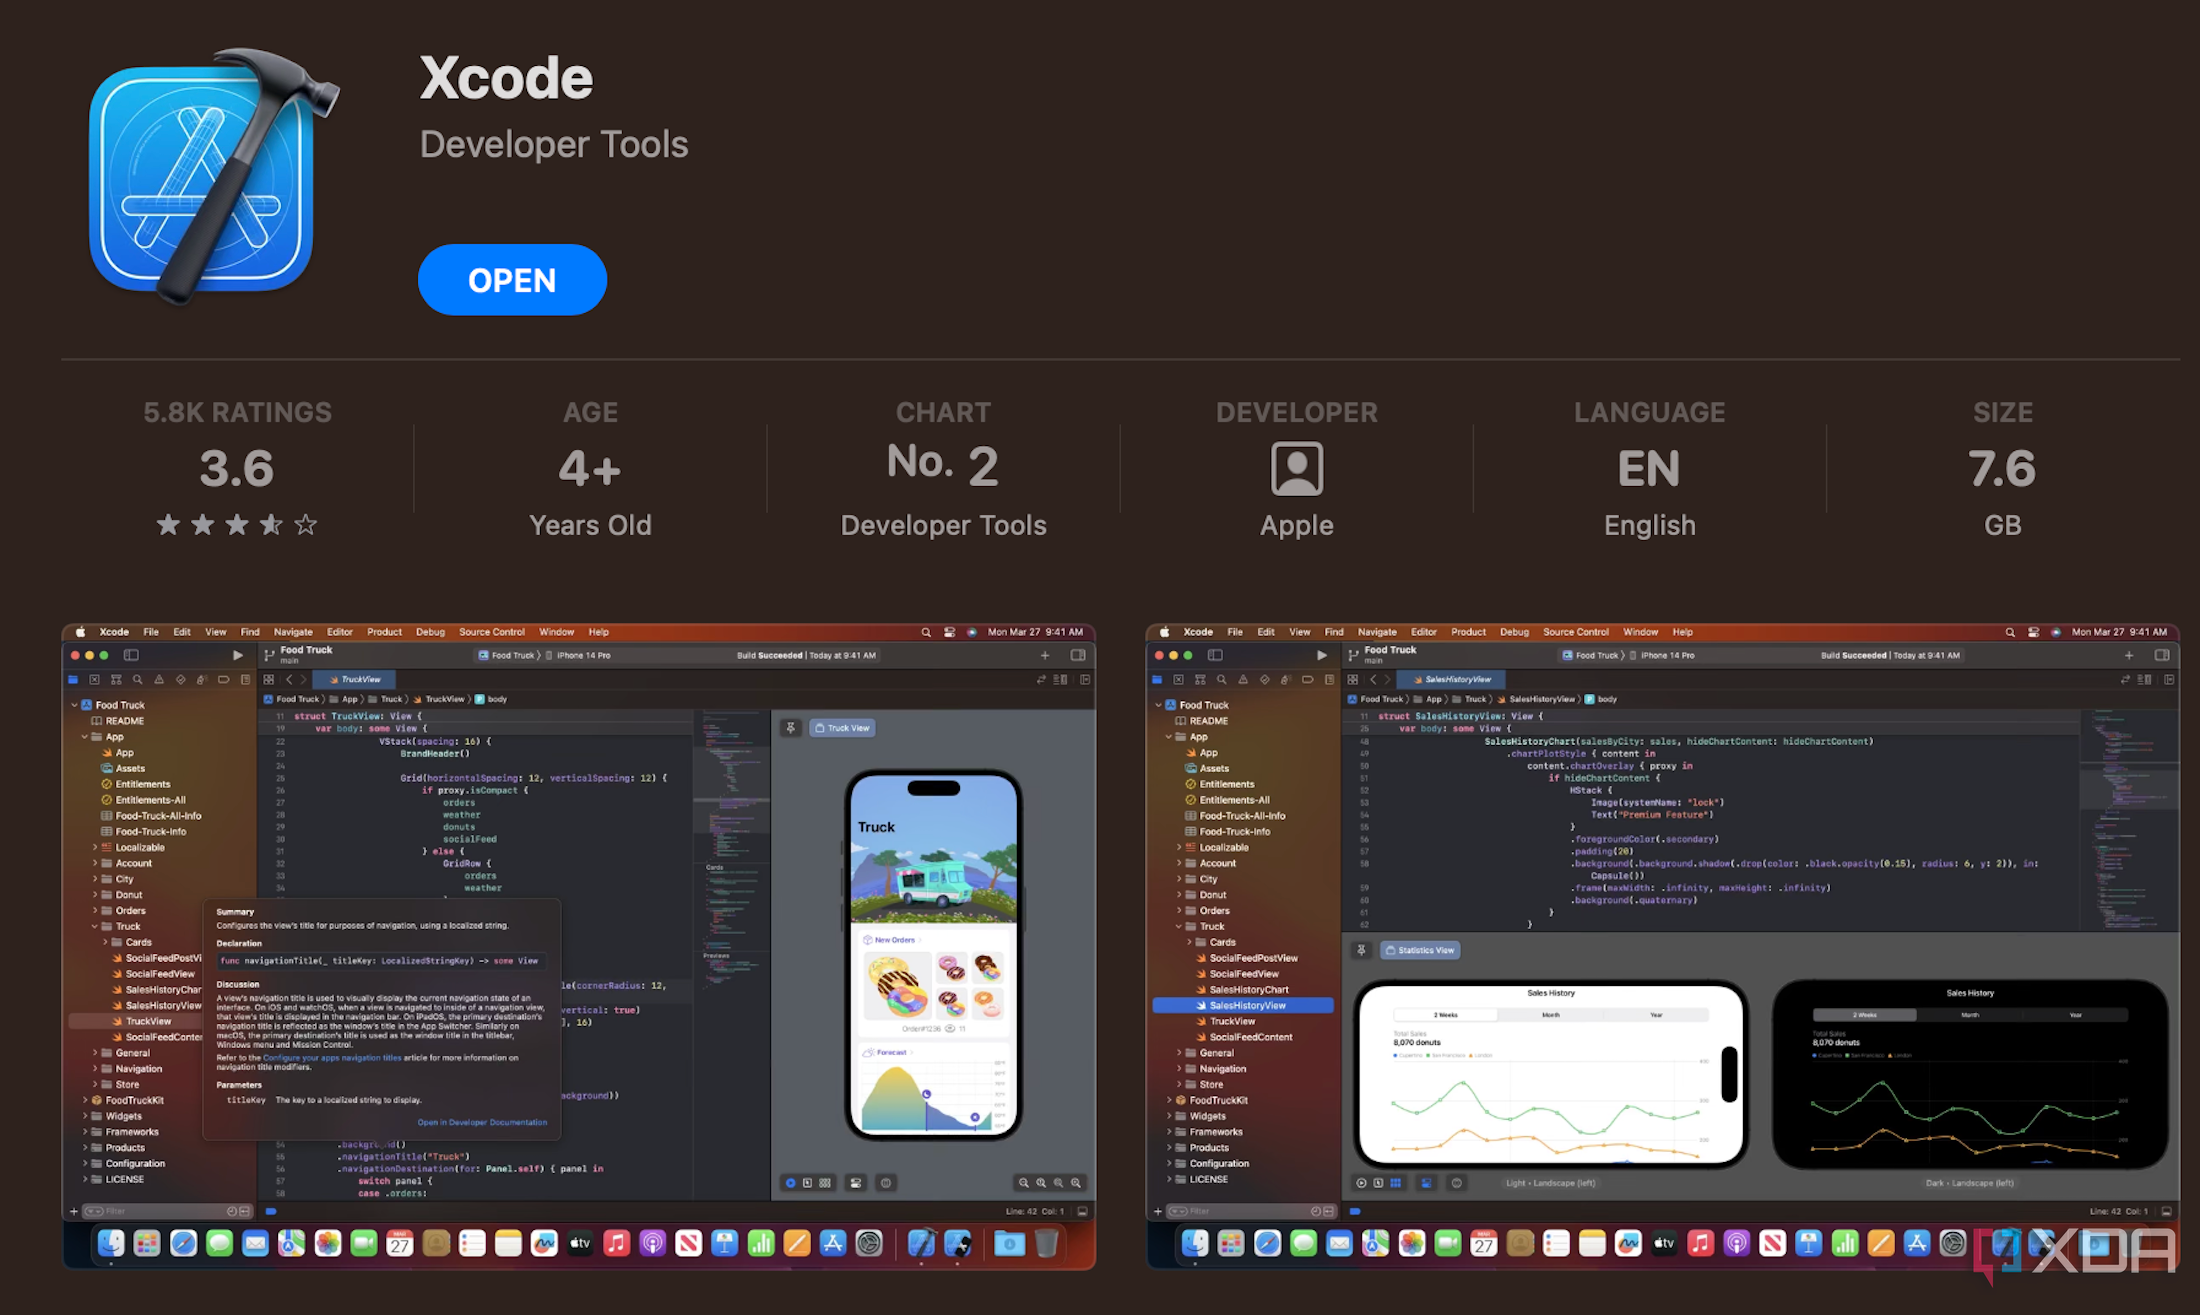 A screenshot showing the Xcode download page on App Store.